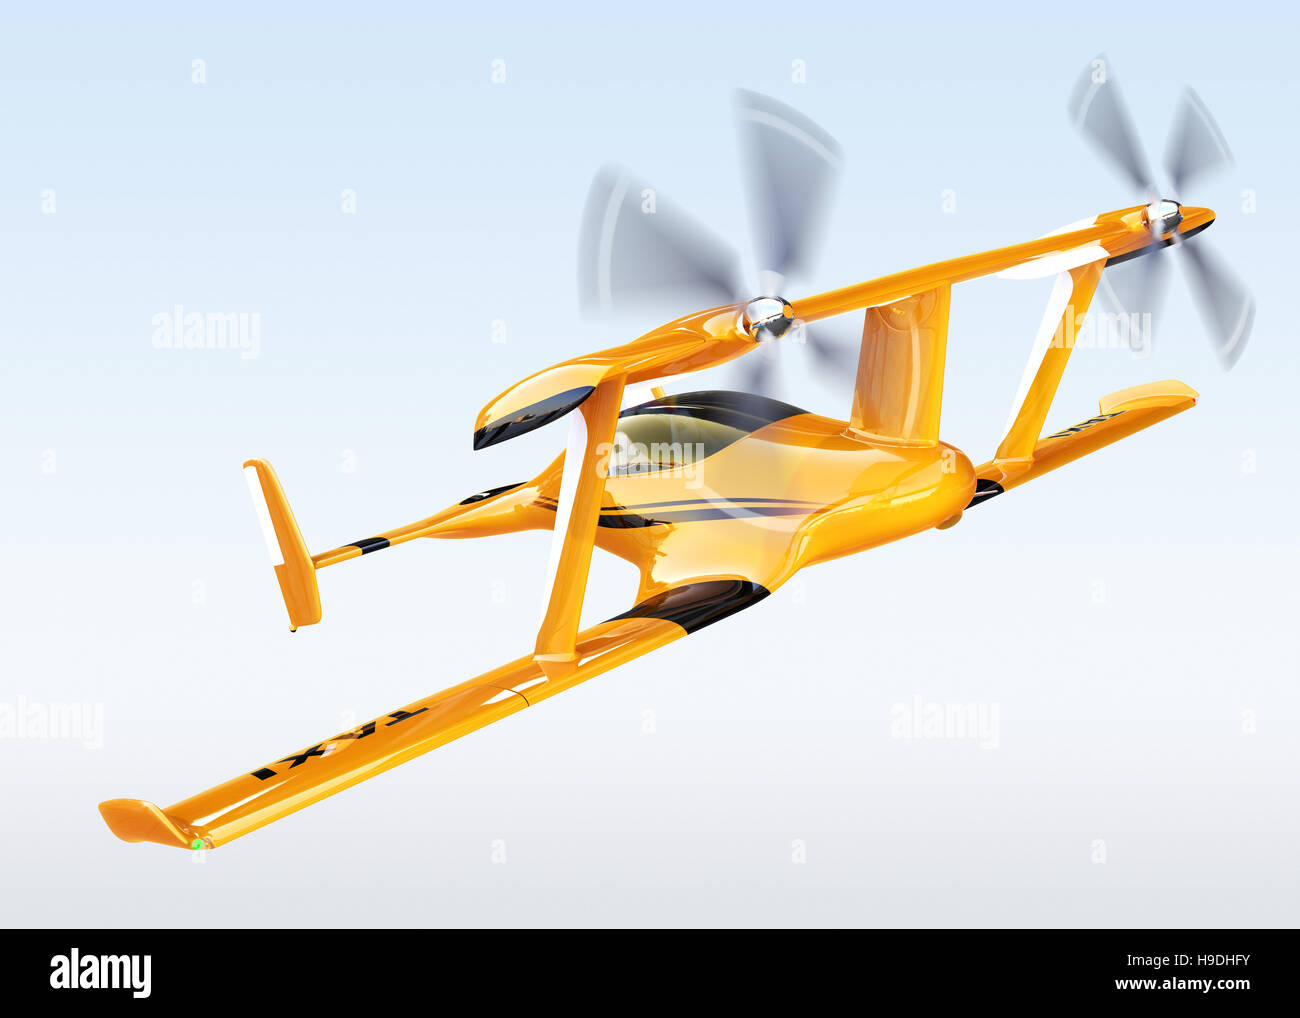 Yellow autonomous flying drone taxi flying in the sky. 3D rendering image. Stock Photo